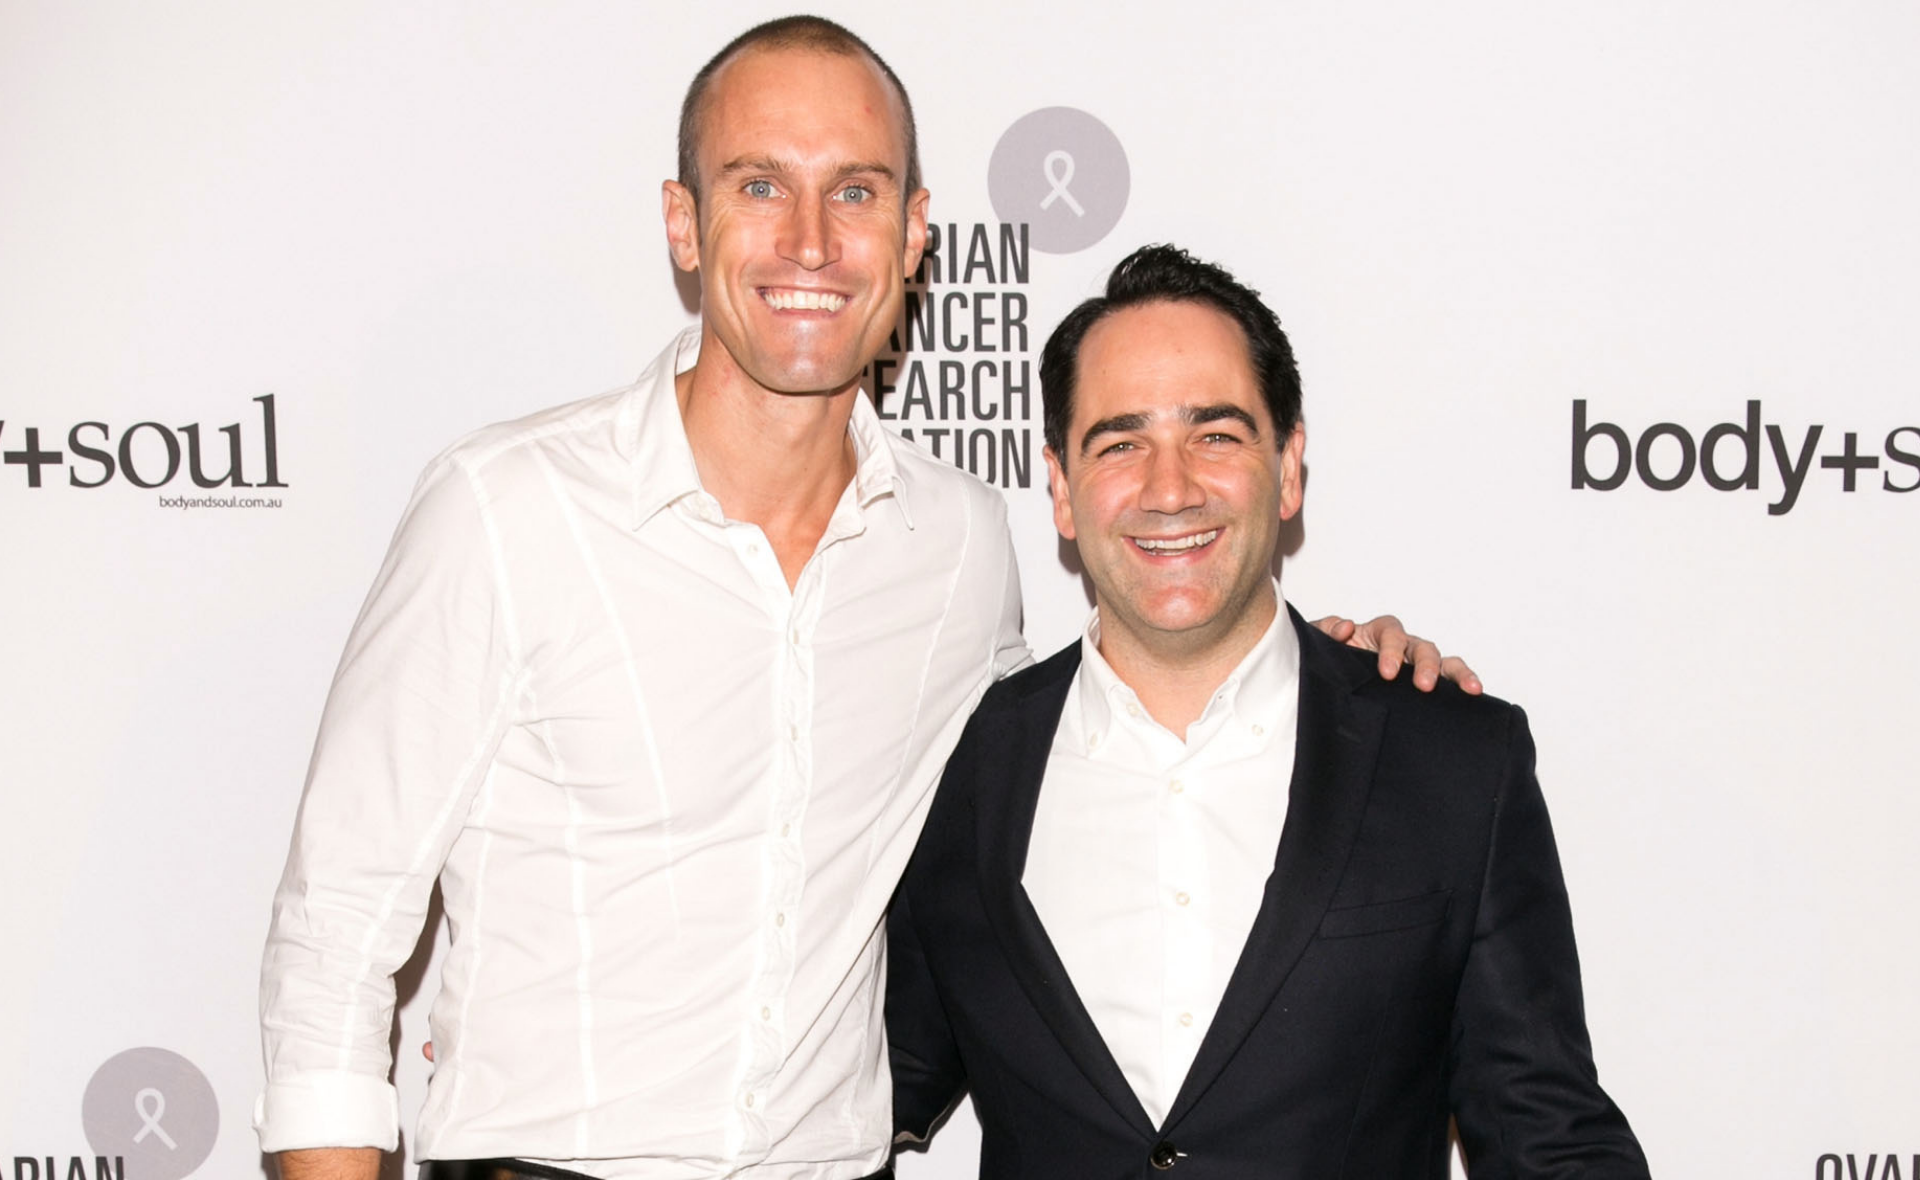 EXCLUSIVE: After ten years on air, Fitzy and Wippa “never dreamed” they’d end up where they are today